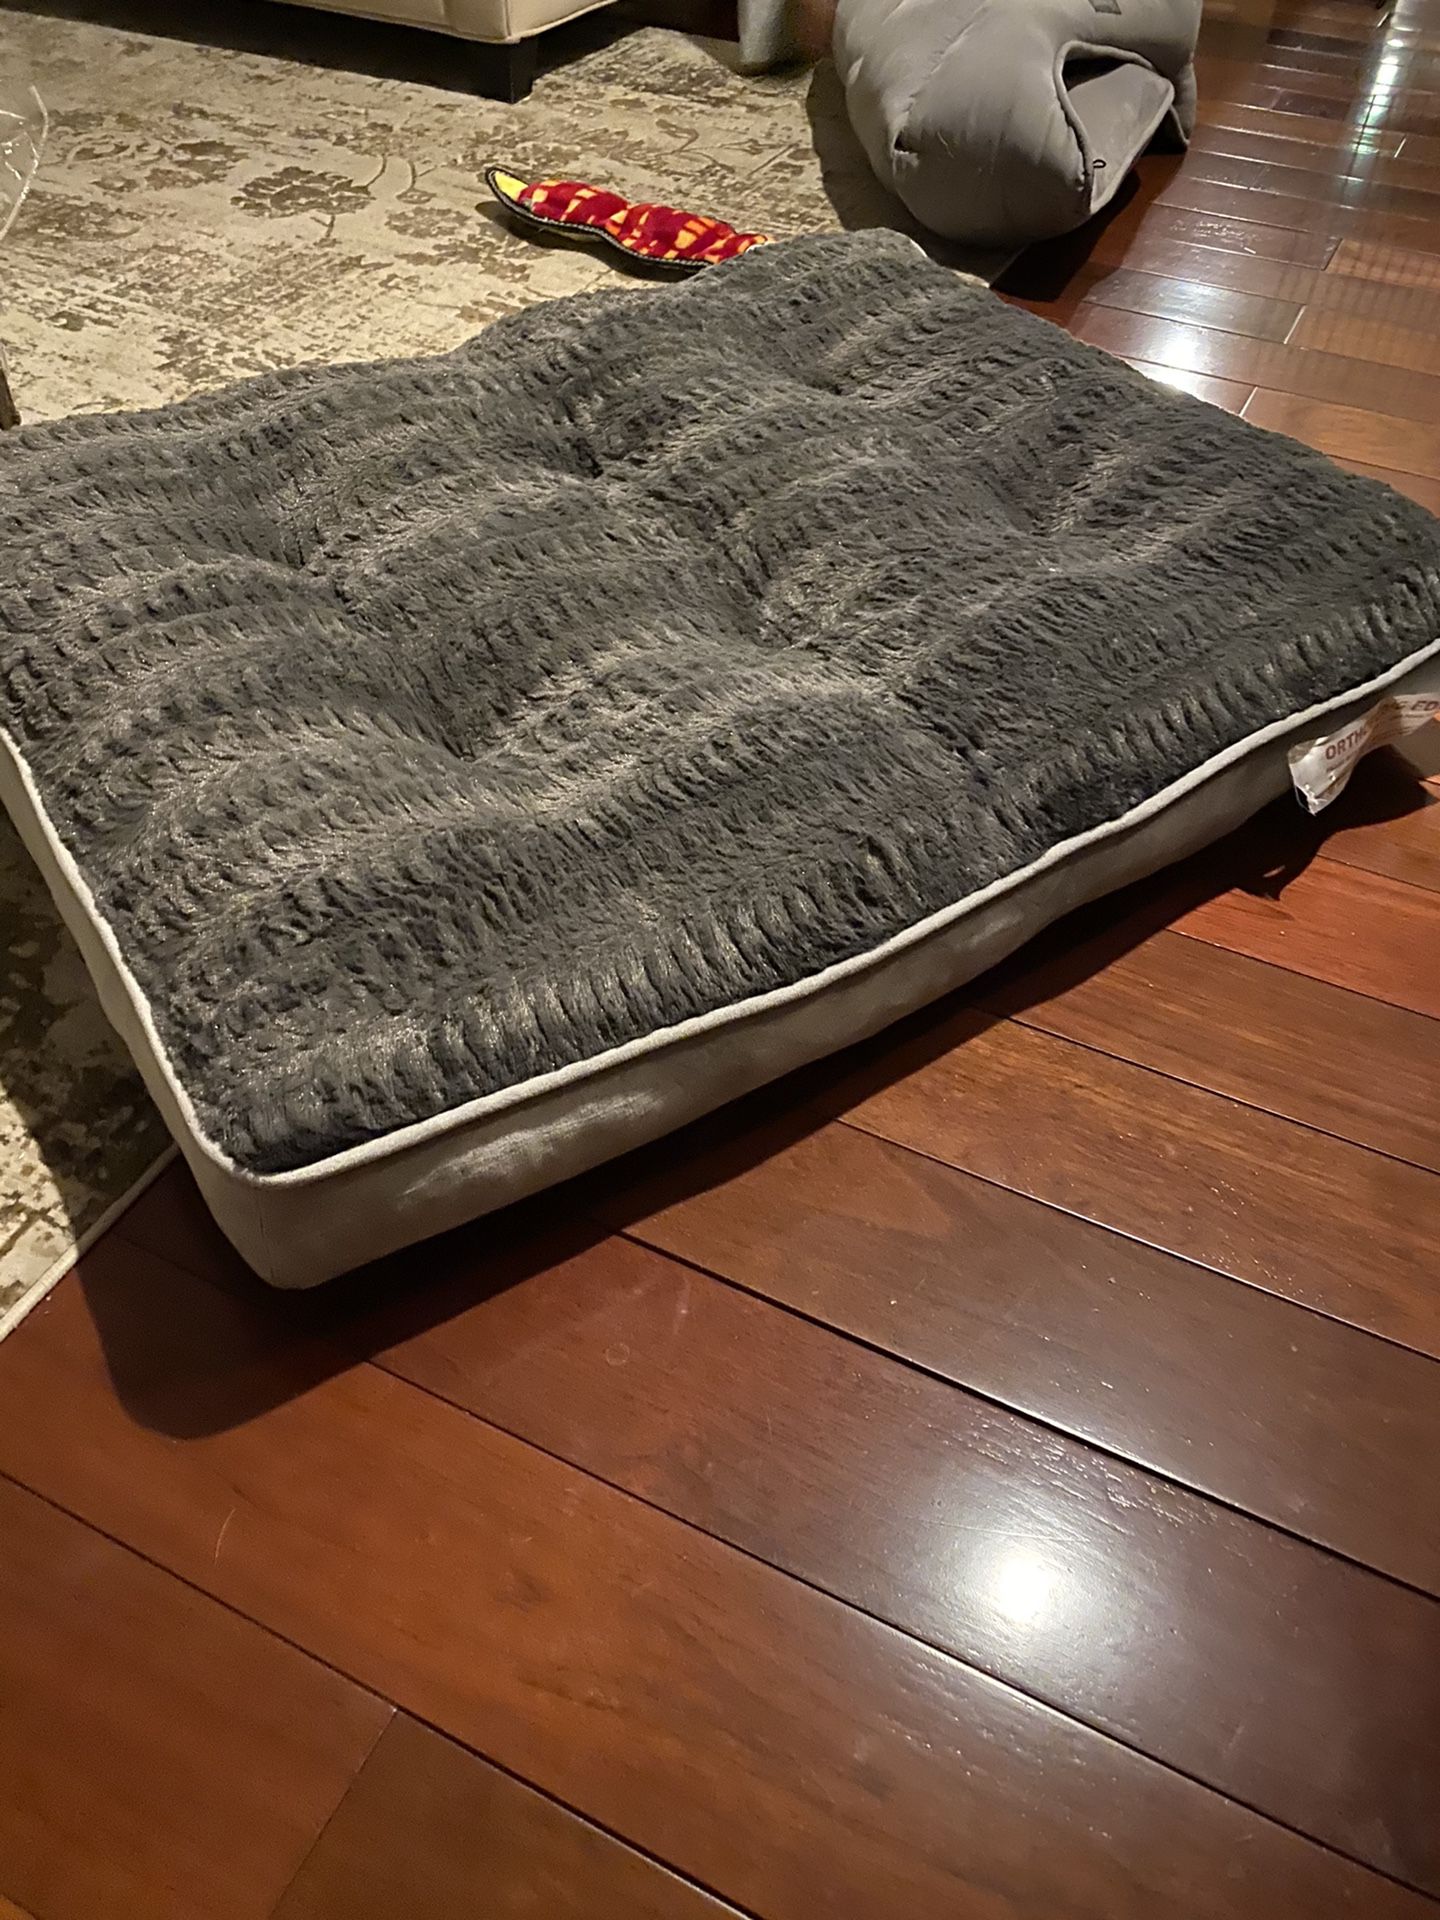 Large dog bed for sale